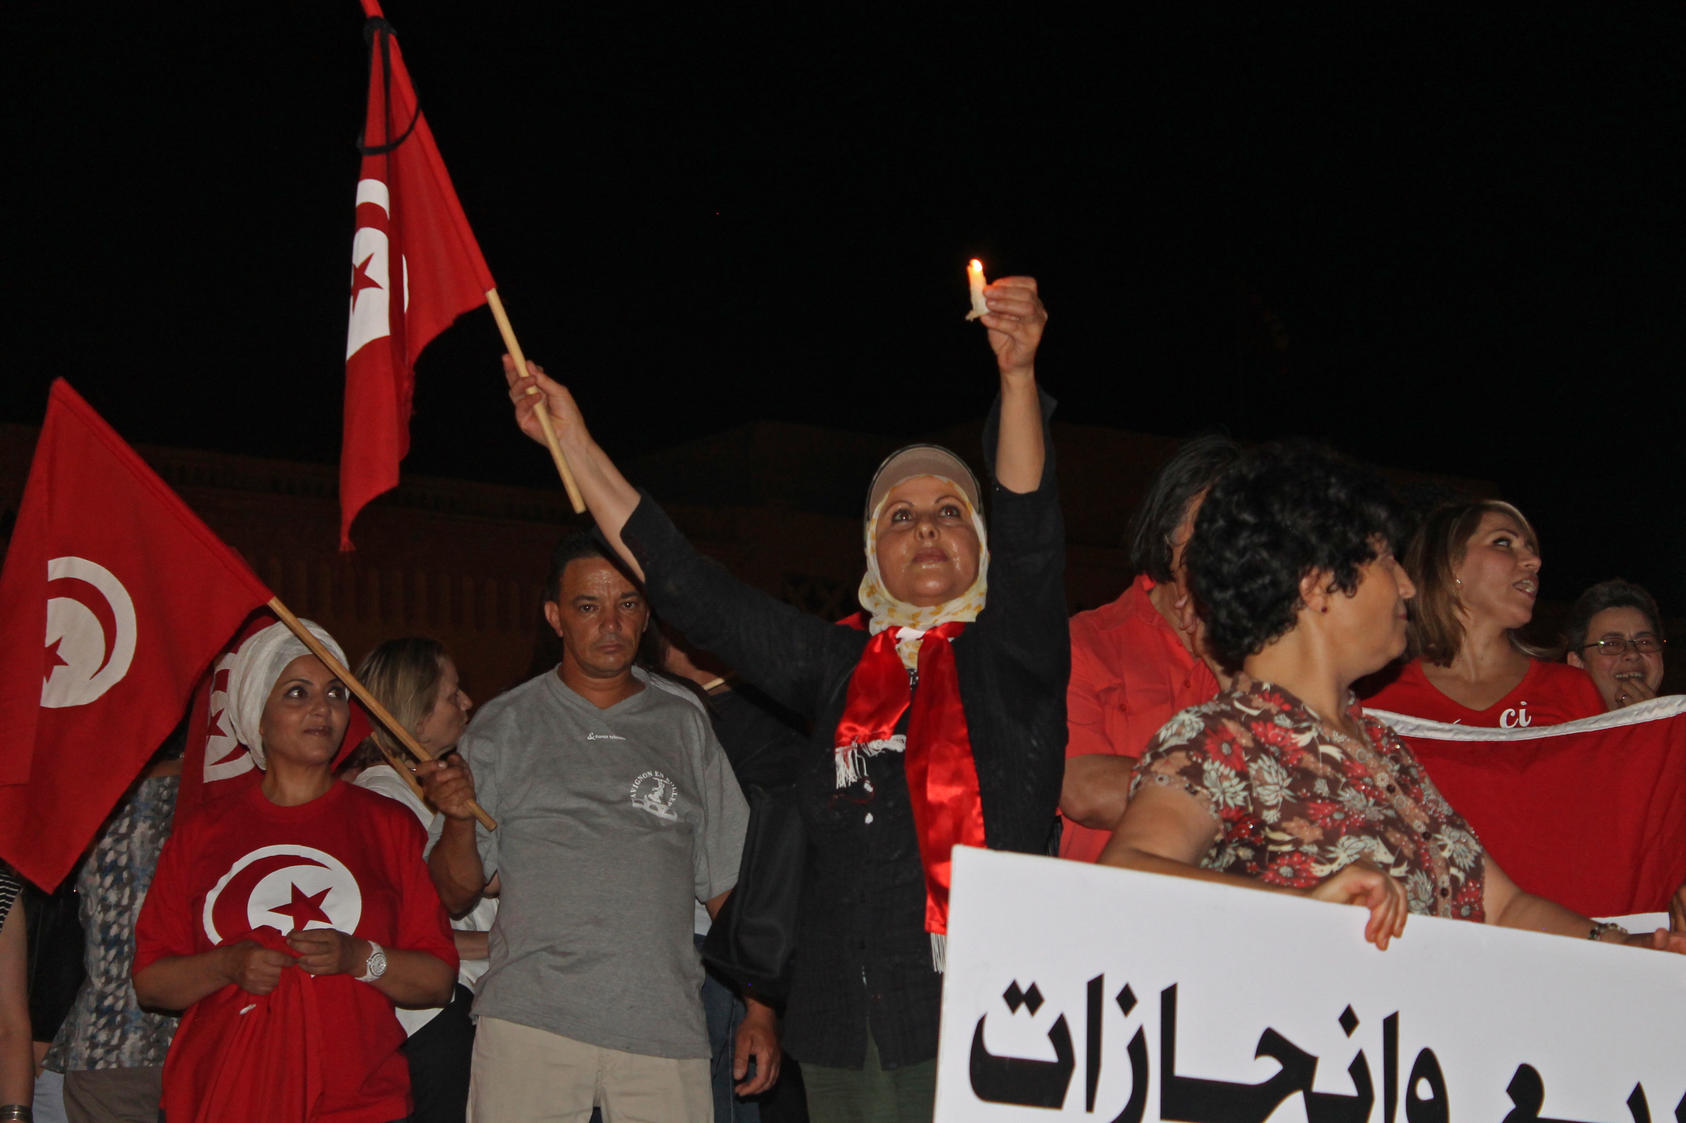 Activists organize a candlelight protest in Tunis